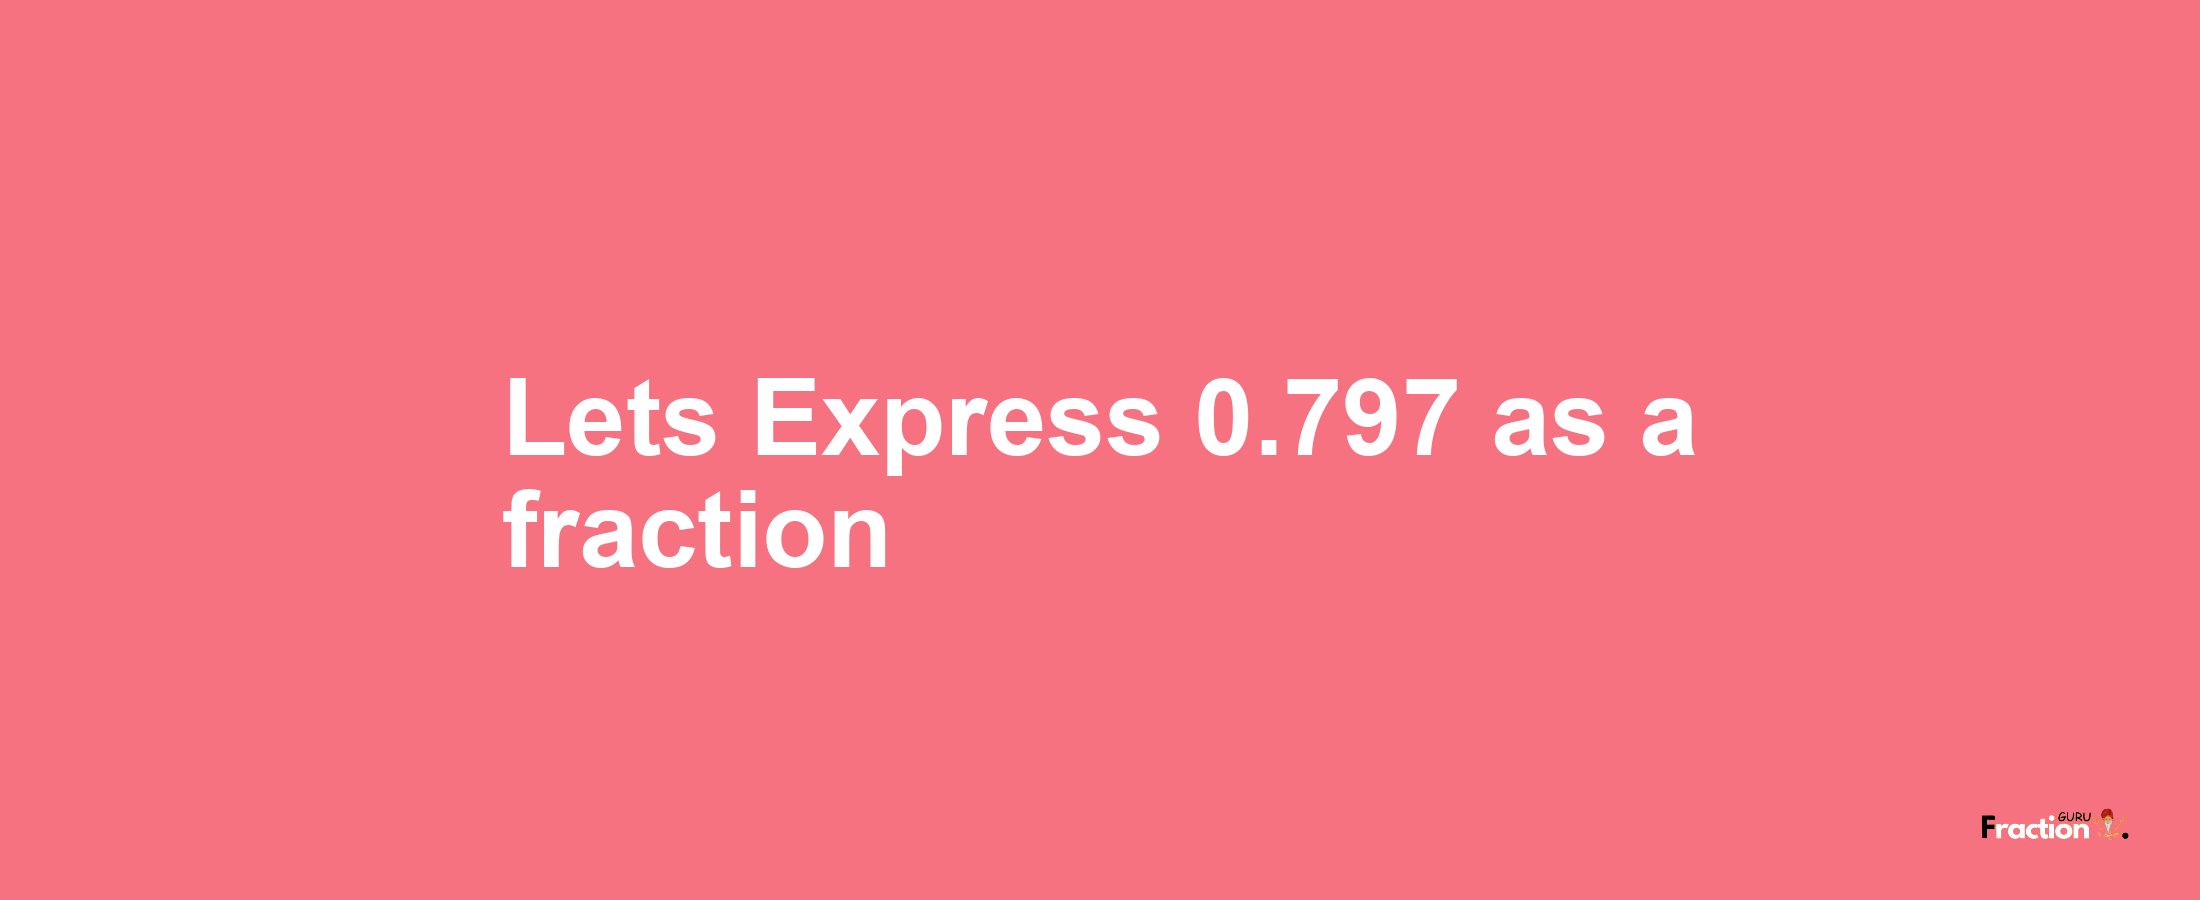 Lets Express 0.797 as afraction